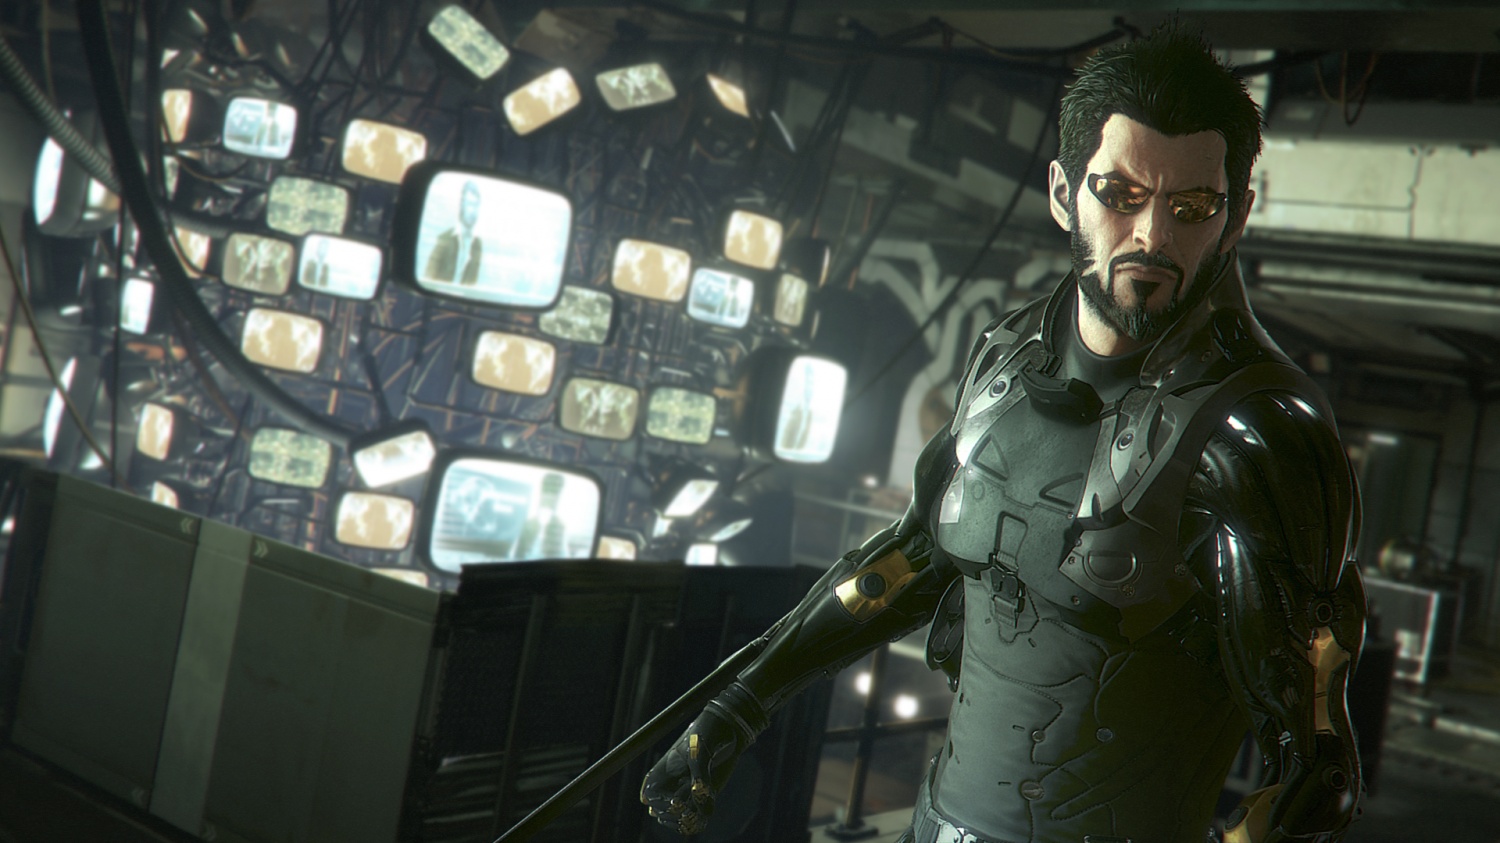 Square Enix's Deus Ex, along with several other IPs and studios, head to Embracer for $300 million